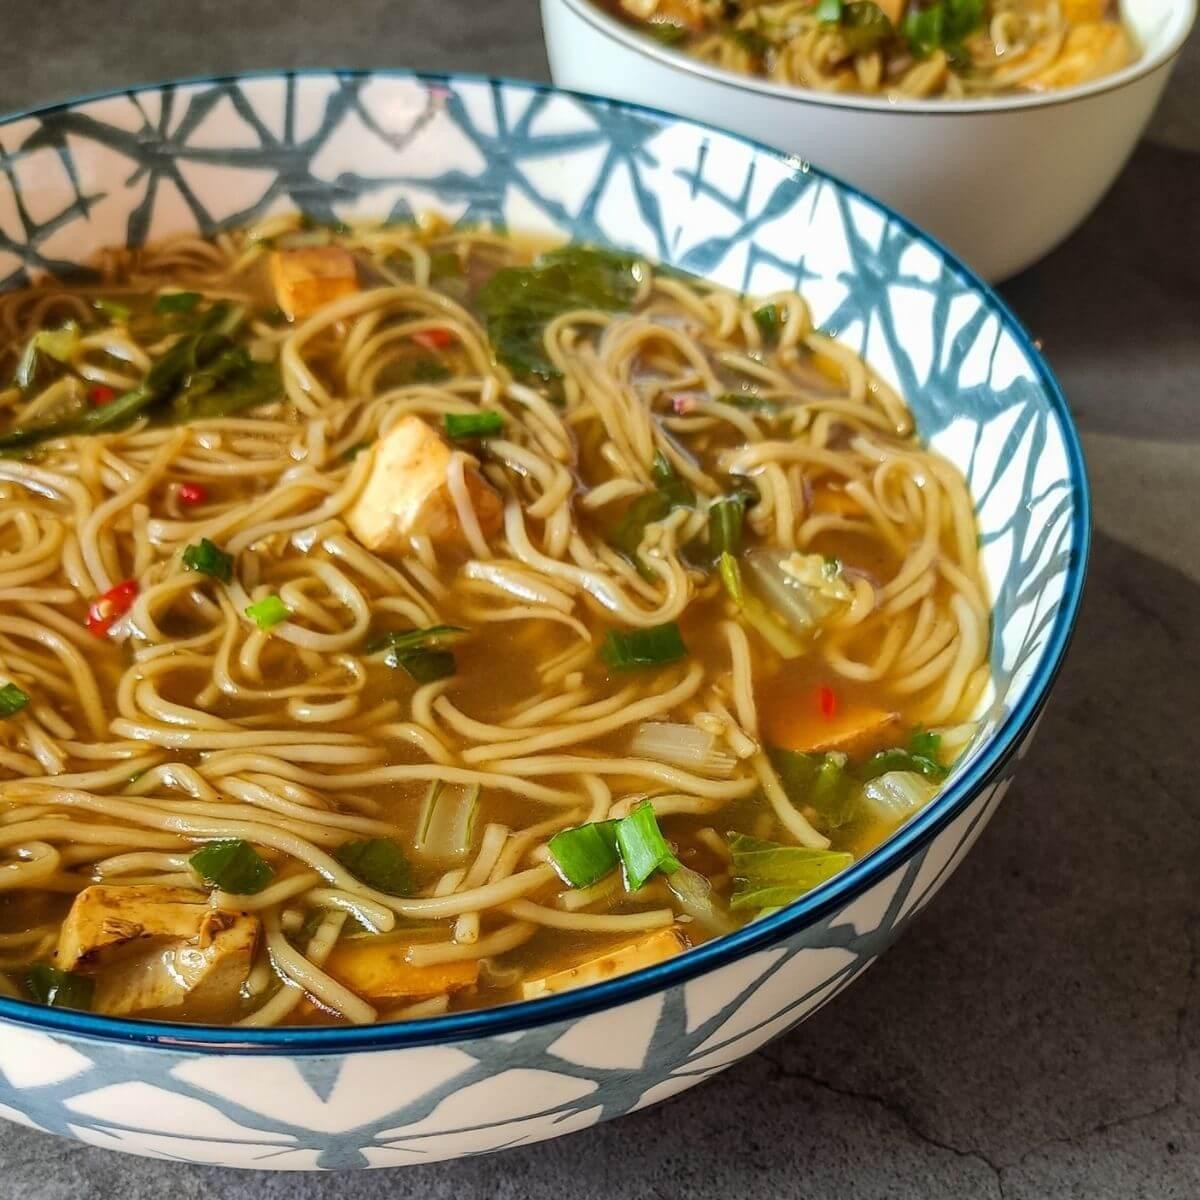 Paneer (Home-made Cheese) Noodle Soup